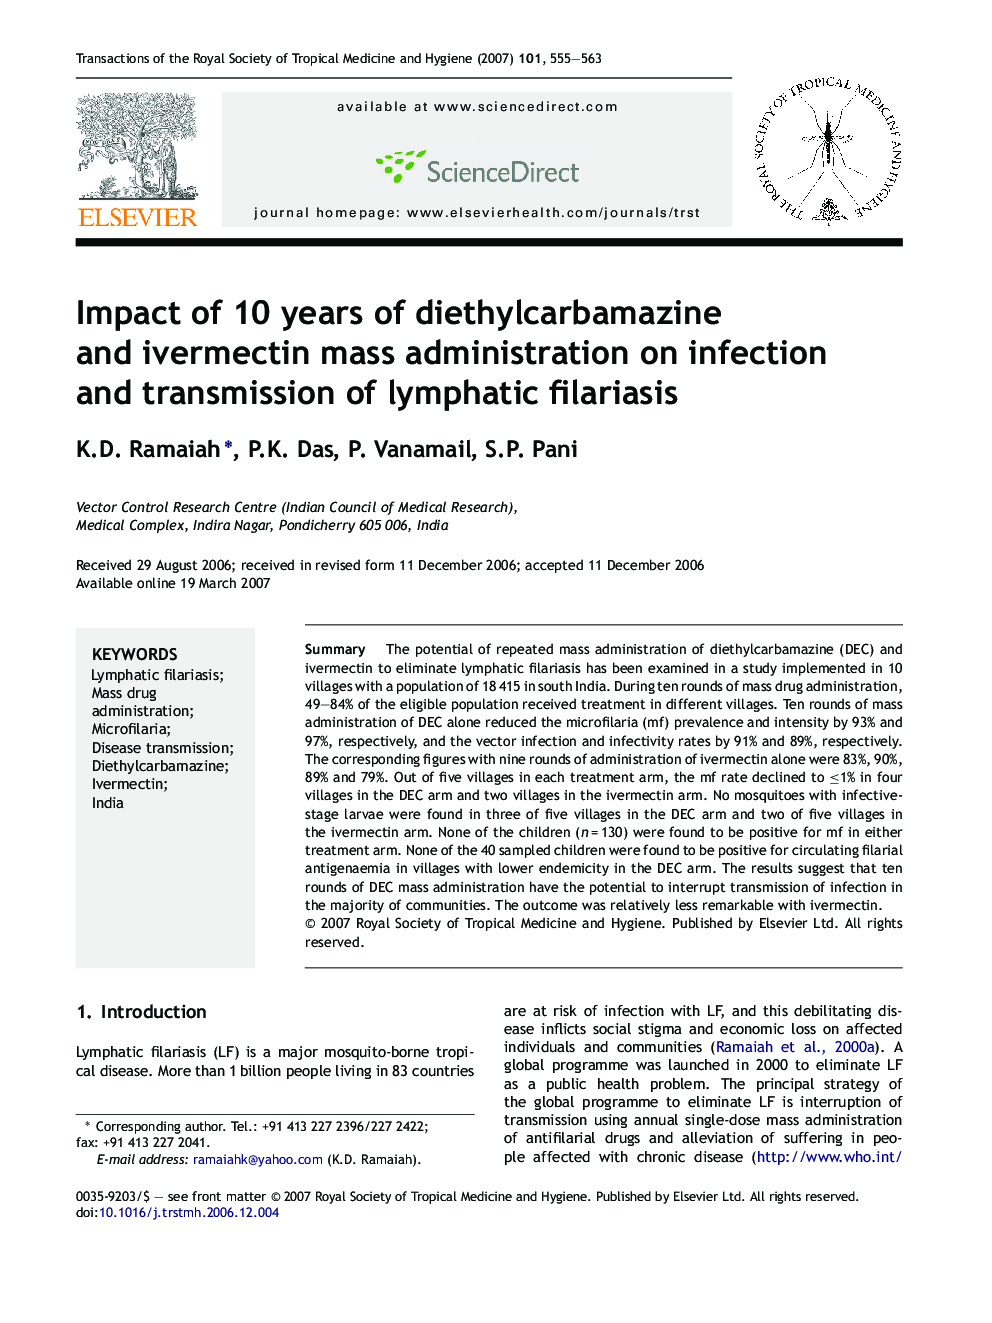 Impact of 10 years of diethylcarbamazine and ivermectin mass administration on infection and transmission of lymphatic filariasis